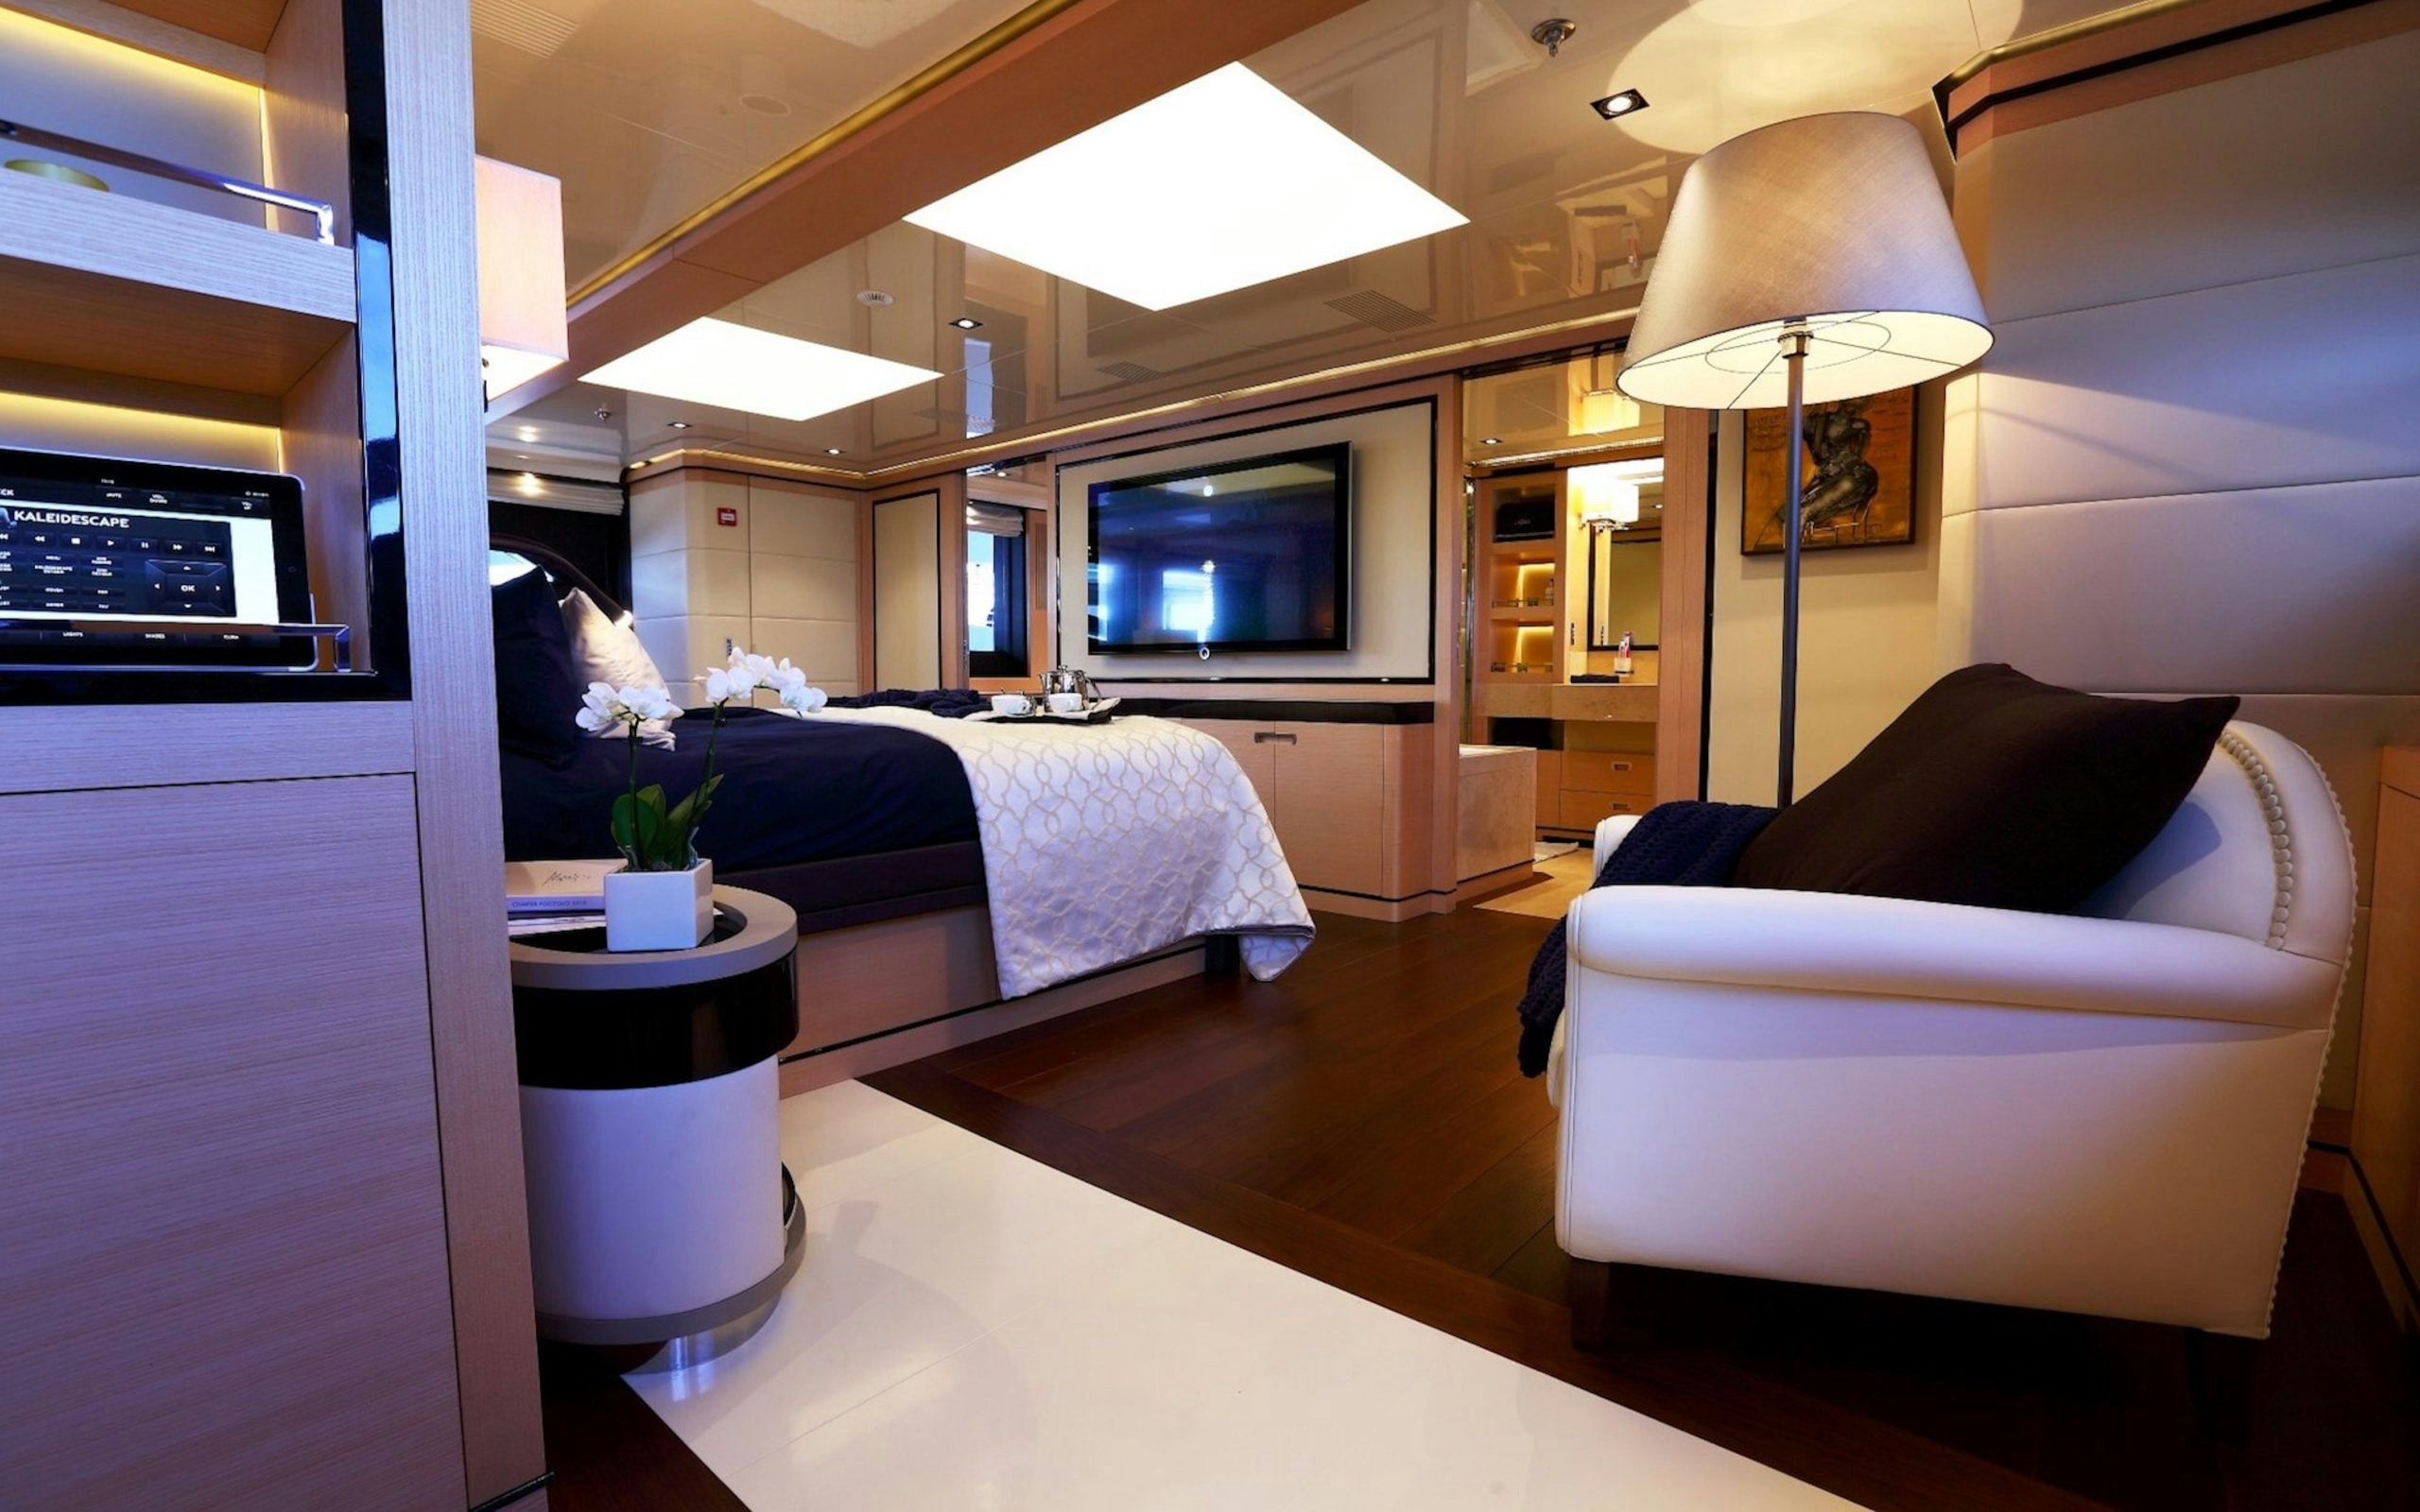 2 LADIES LUXURY YACHT CHARTER - 2 VIP DOUBLE BED CABINS